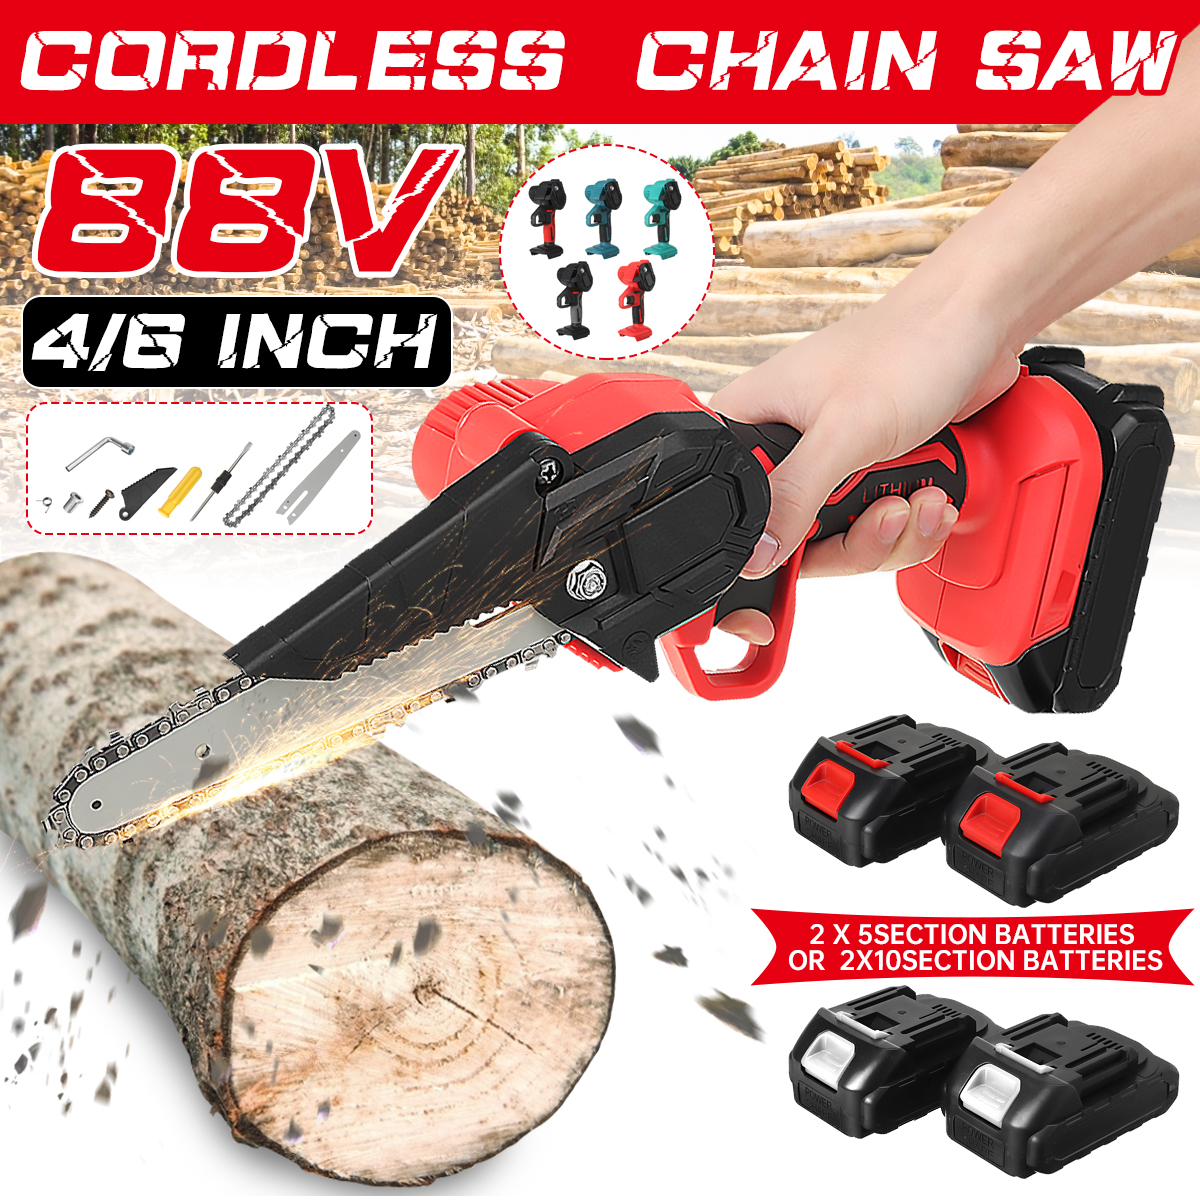 21V-46-Inch-Cordless-Electric-Chain-Saw-One-Hand-Saw-Mini-Portable-Woodworking-Wood-Cutter-W-2pcs-Ba-1880984-1